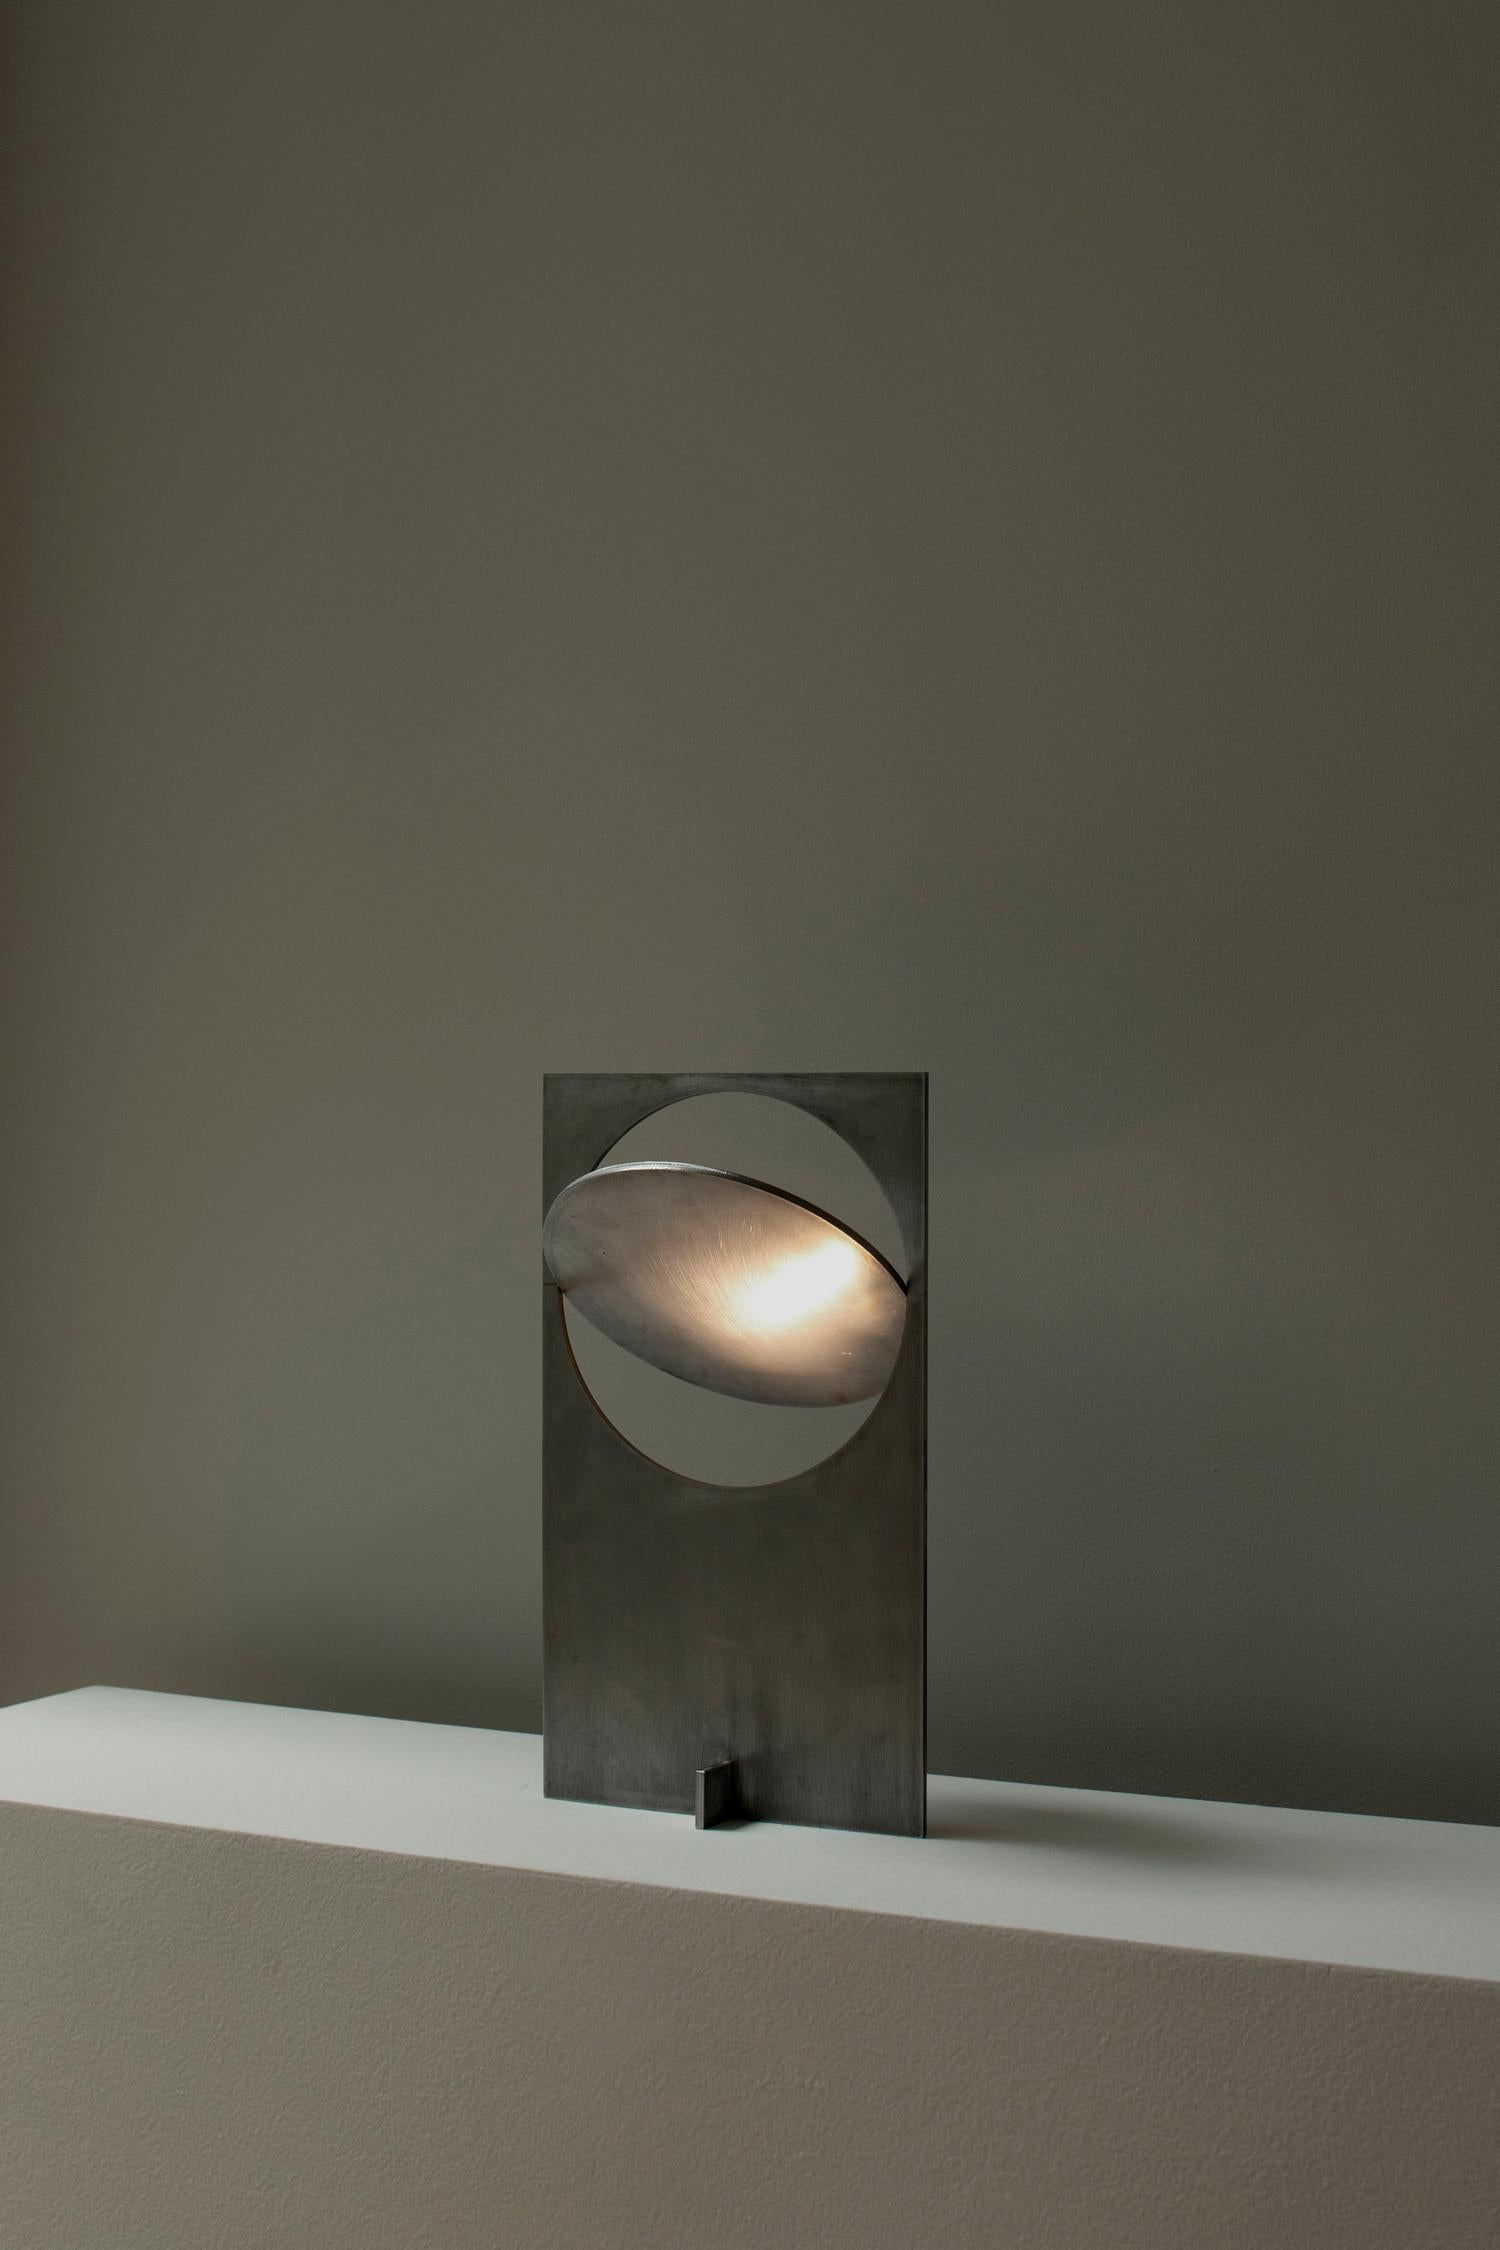 OBJ-01 steel table lamp by Manu Bano
Dimensions: H 38 x W 22 x D 7 cm
Material: hand-polished steel that is sealed with beeswax

All lamps are wired for the US, but voltage converter is available for other countries. 

OBJ-01 is an